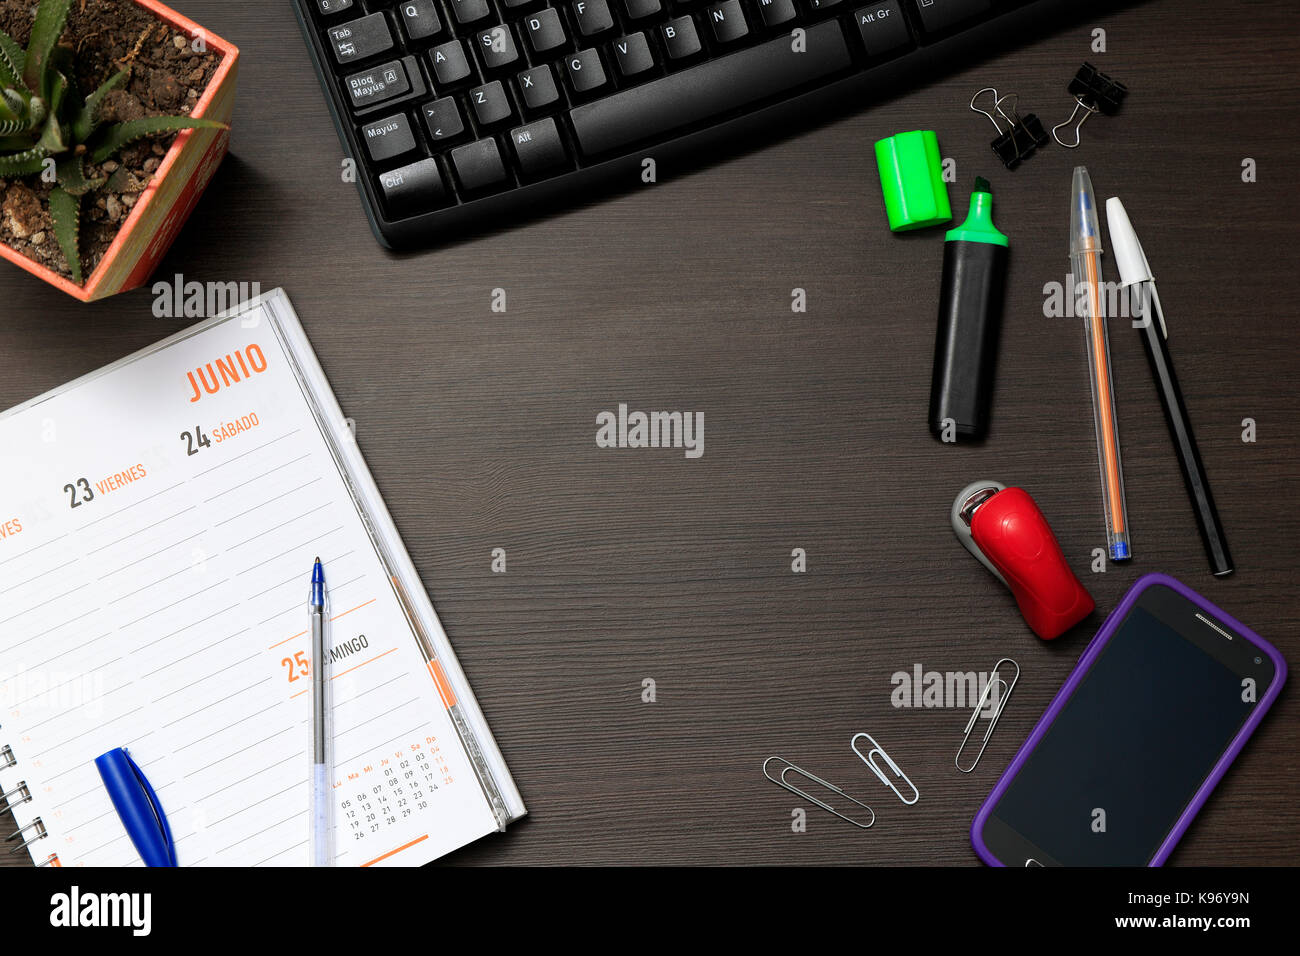 Top view of Office desk with keyboard, diary, clips, pens, highlighter, buckle, a cactus plant, and a cell phone. Stock Photo